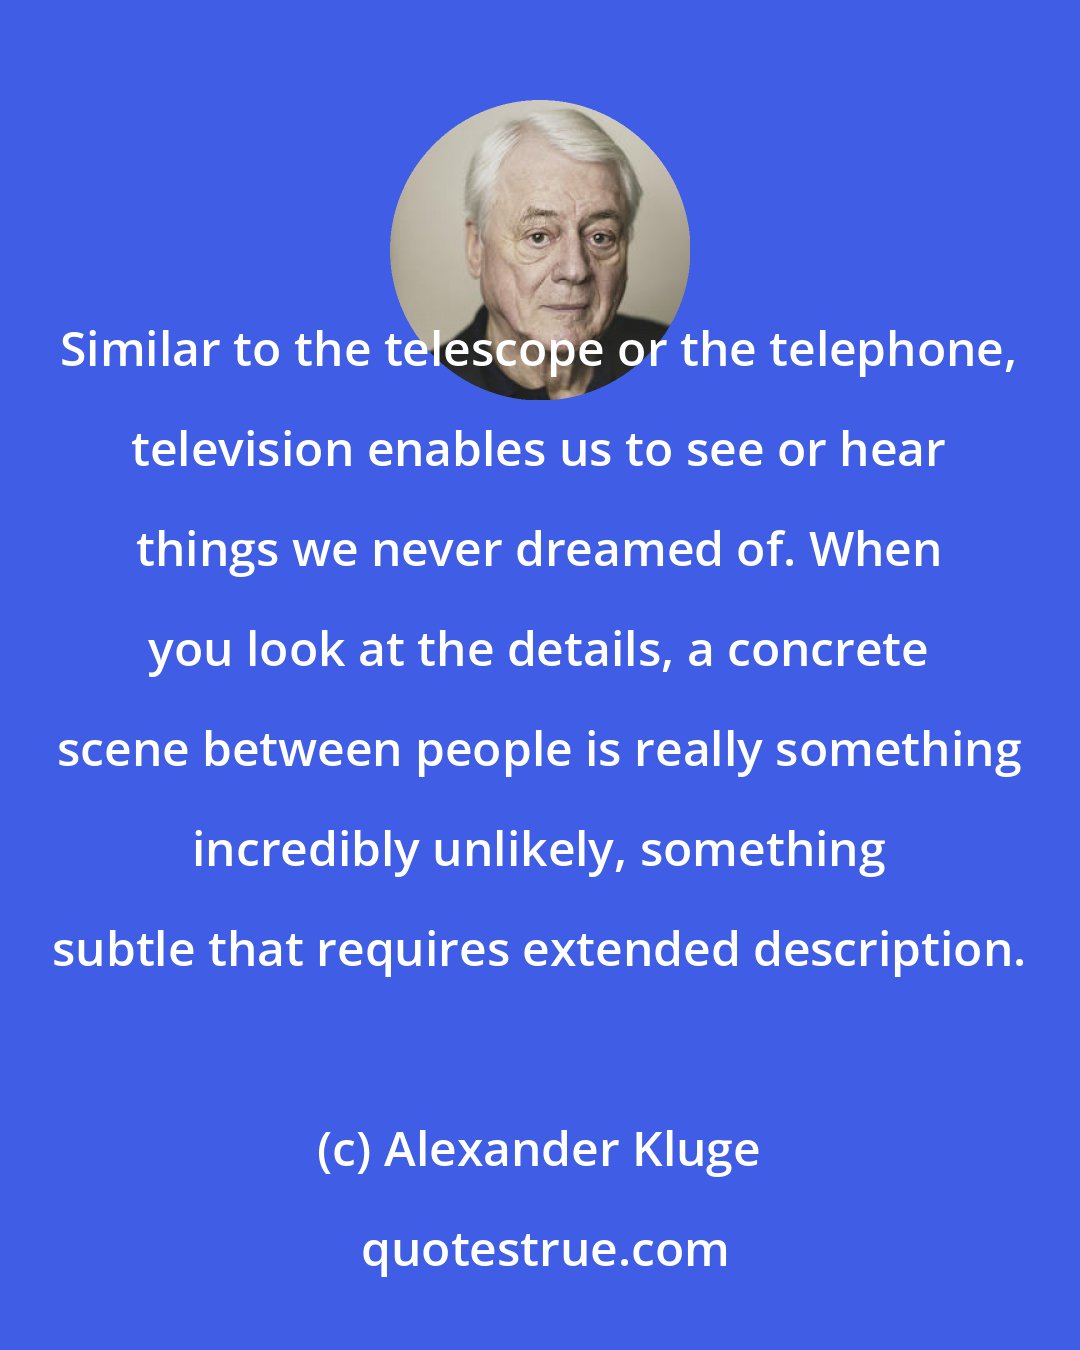 Alexander Kluge: Similar to the telescope or the telephone, television enables us to see or hear things we never dreamed of. When you look at the details, a concrete scene between people is really something incredibly unlikely, something subtle that requires extended description.